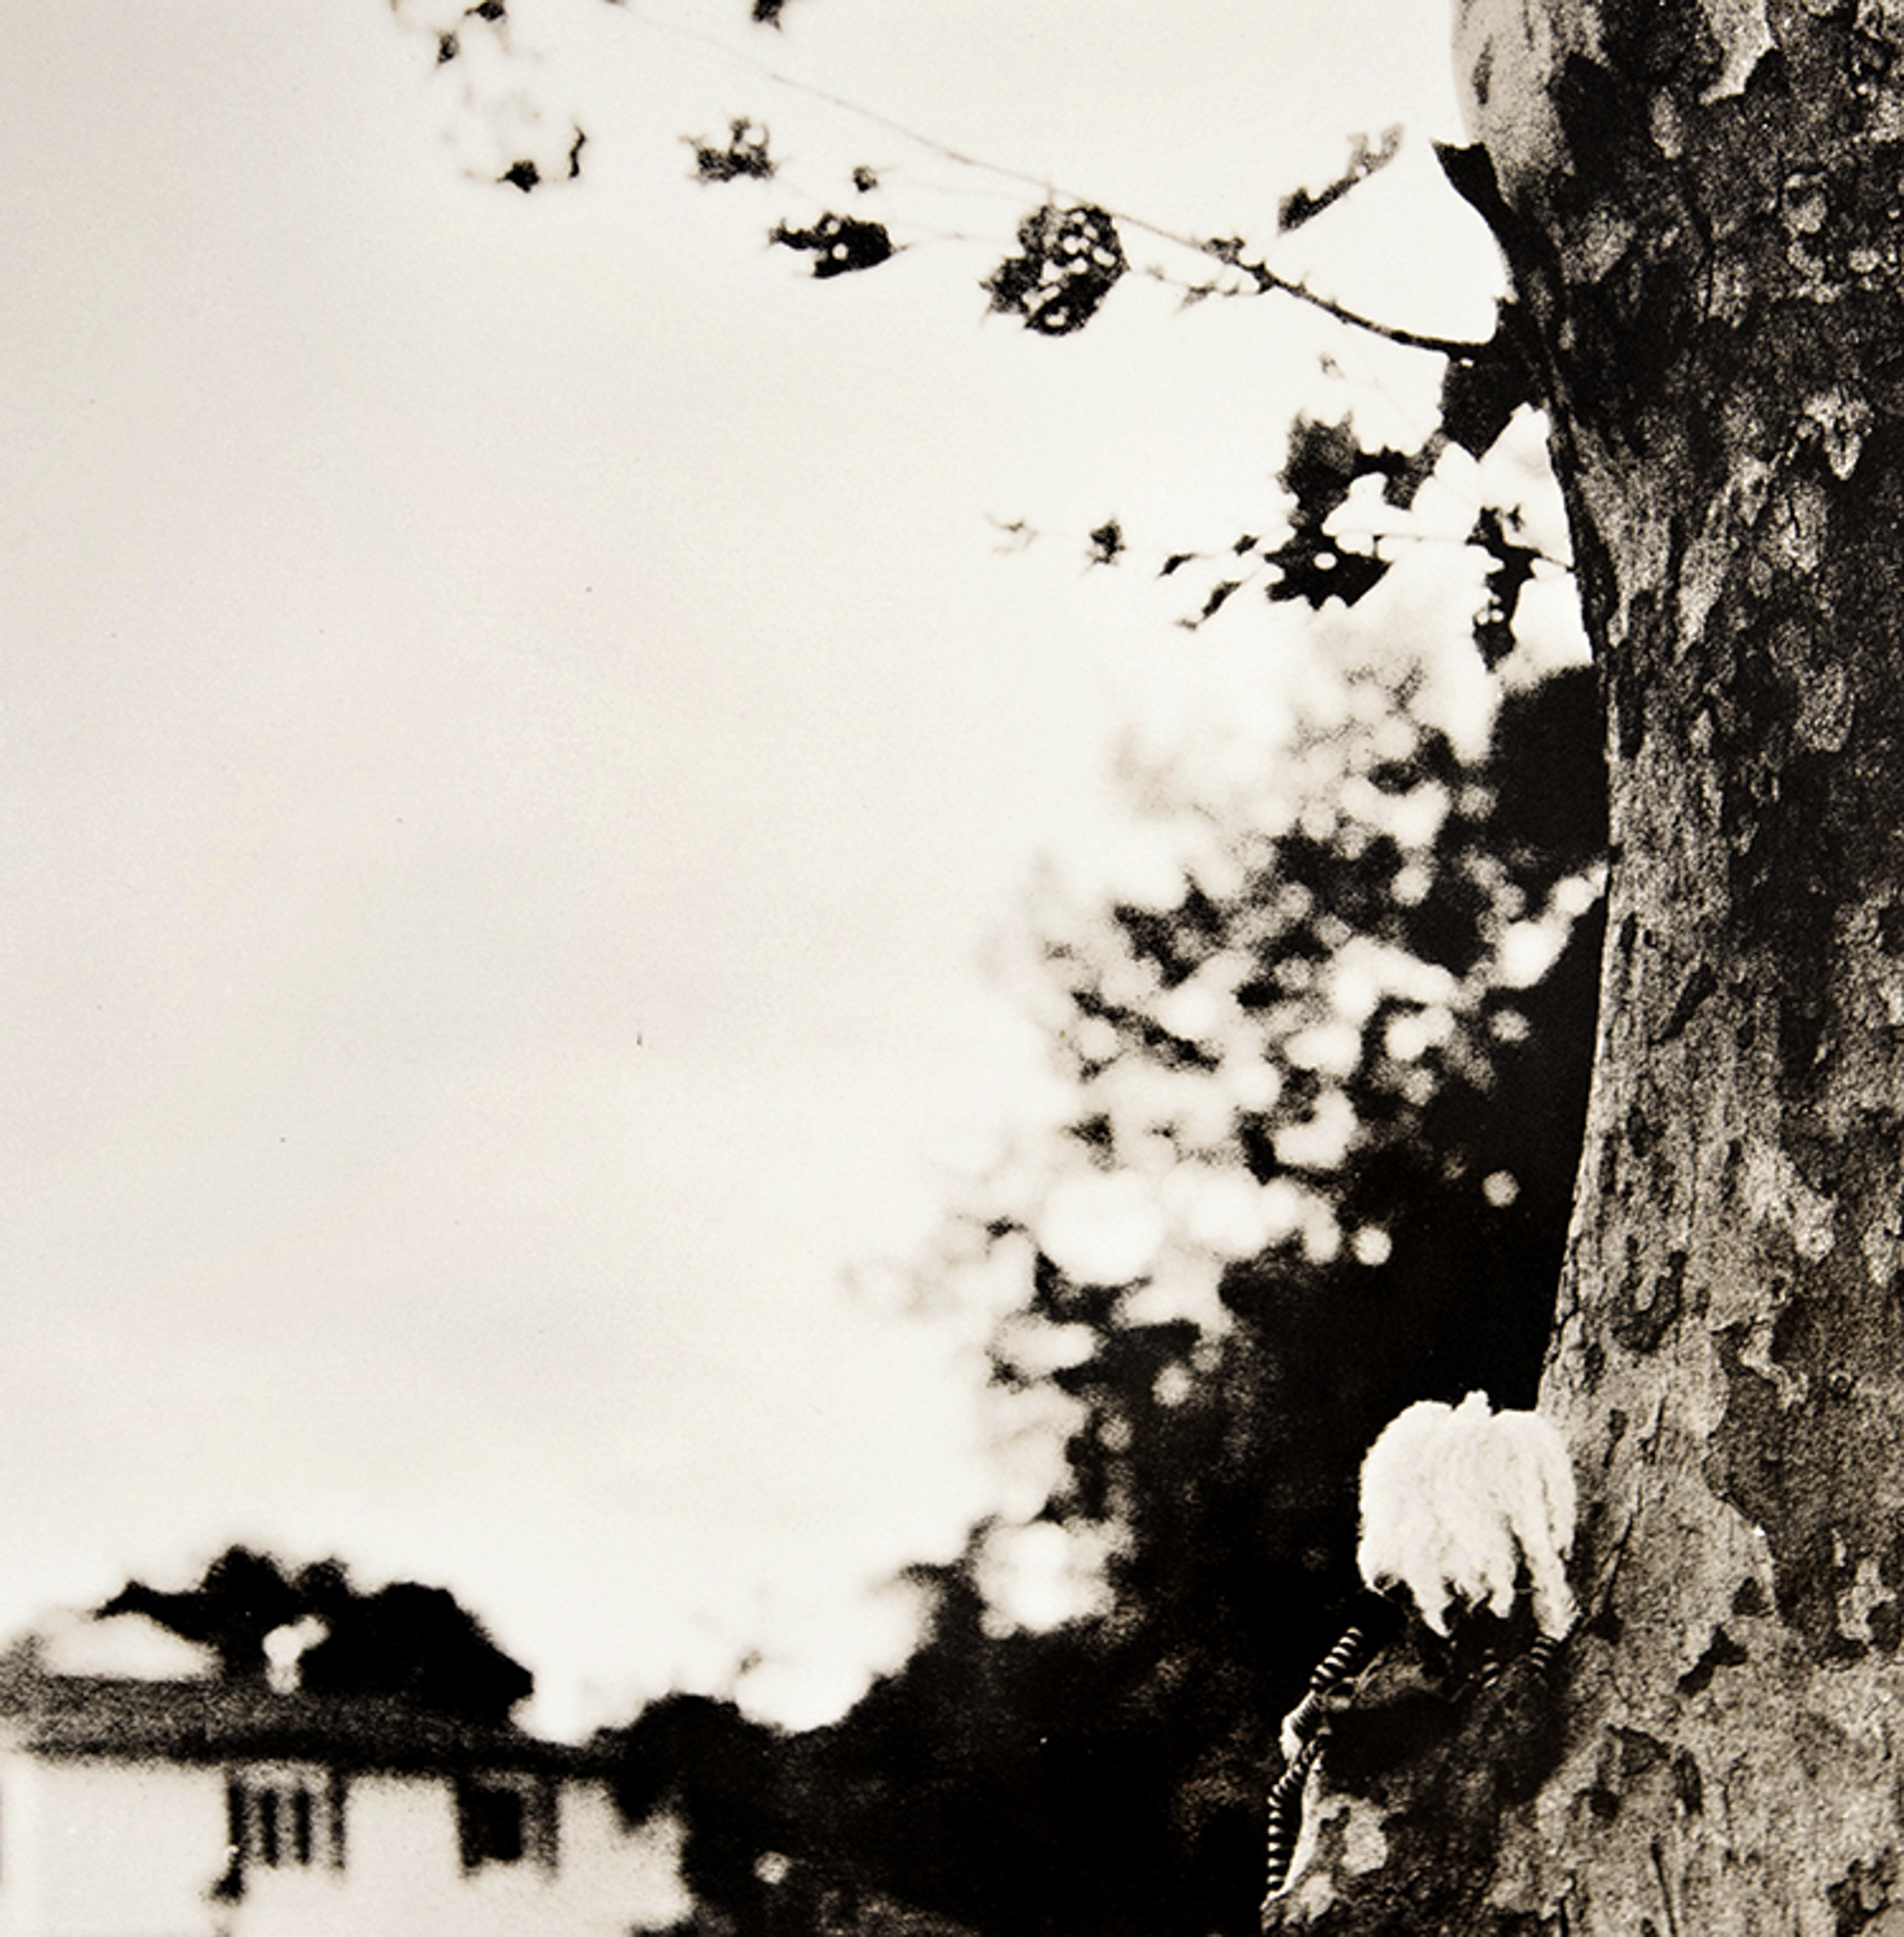   ©KatarzynaDerda    &nbsp;series "If Only" ,    photograph #6, lith print    Chicago 2009 , unique, edition of 1  